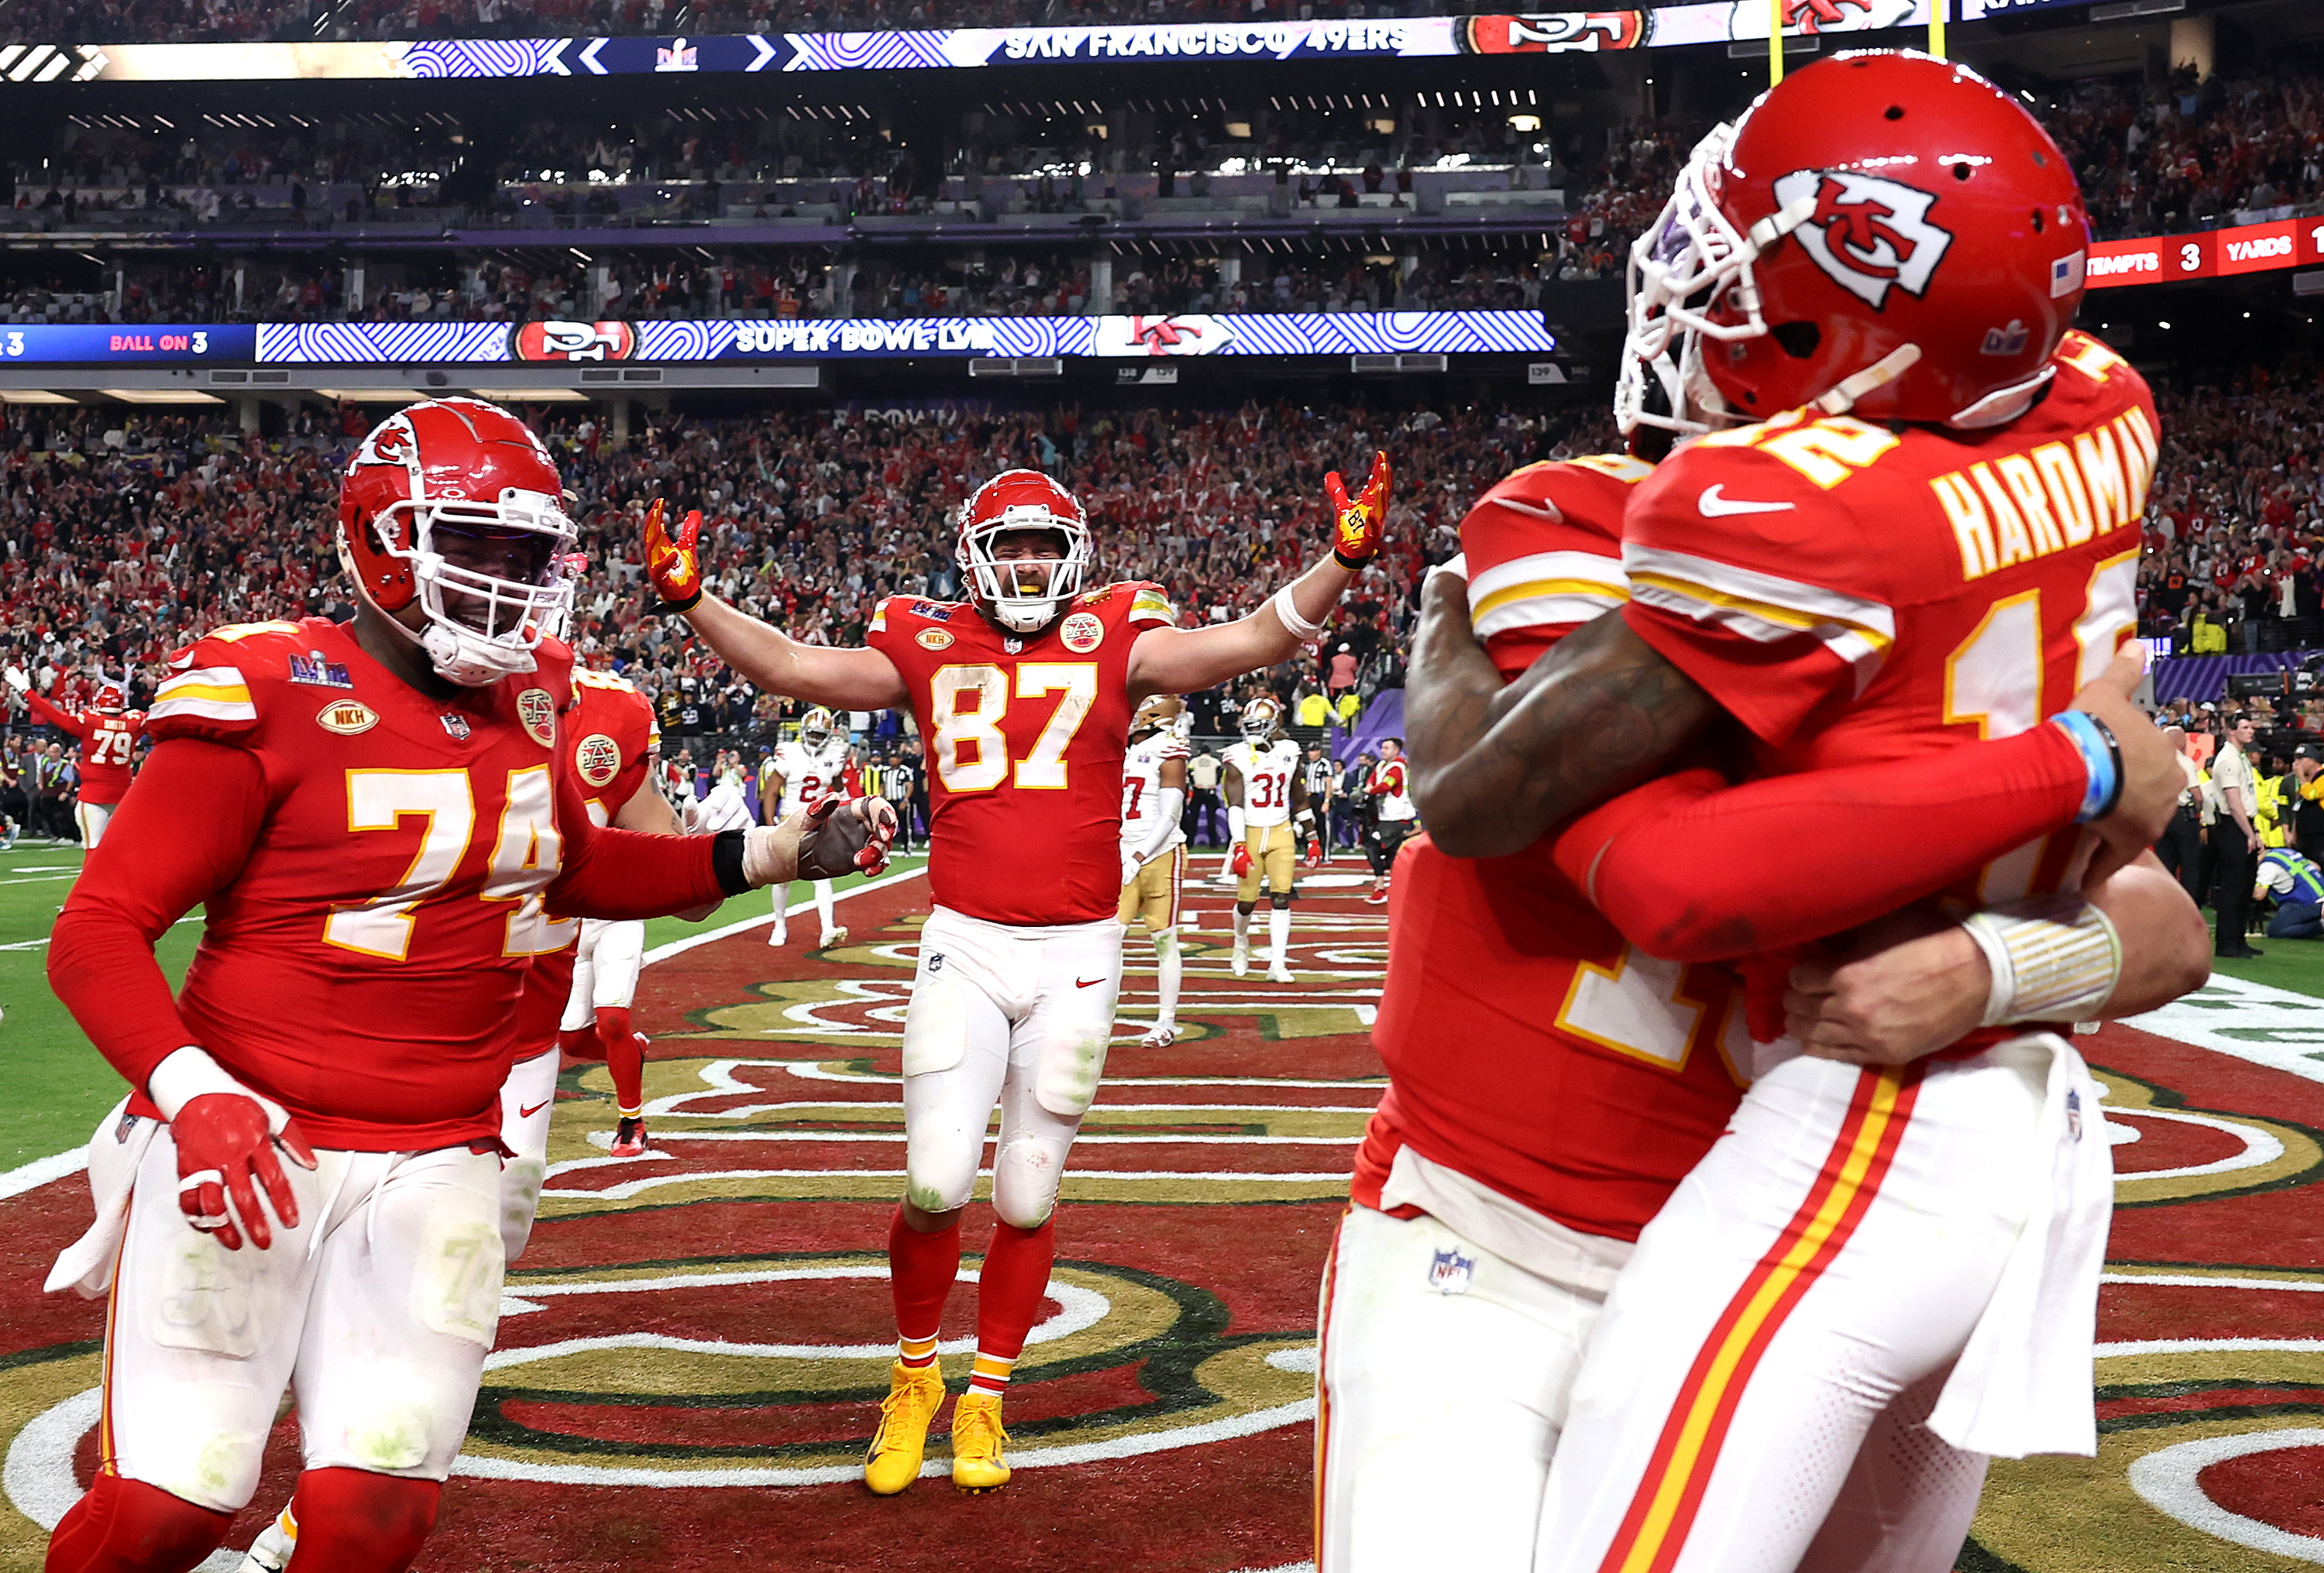 Mecole Hardman Jr. #12 of the Kansas City Chiefs celebrates with teammates after scoring game-winning touchdown against San Francisco 49ers during Super Bowl LVIII at Allegiant Stadium.